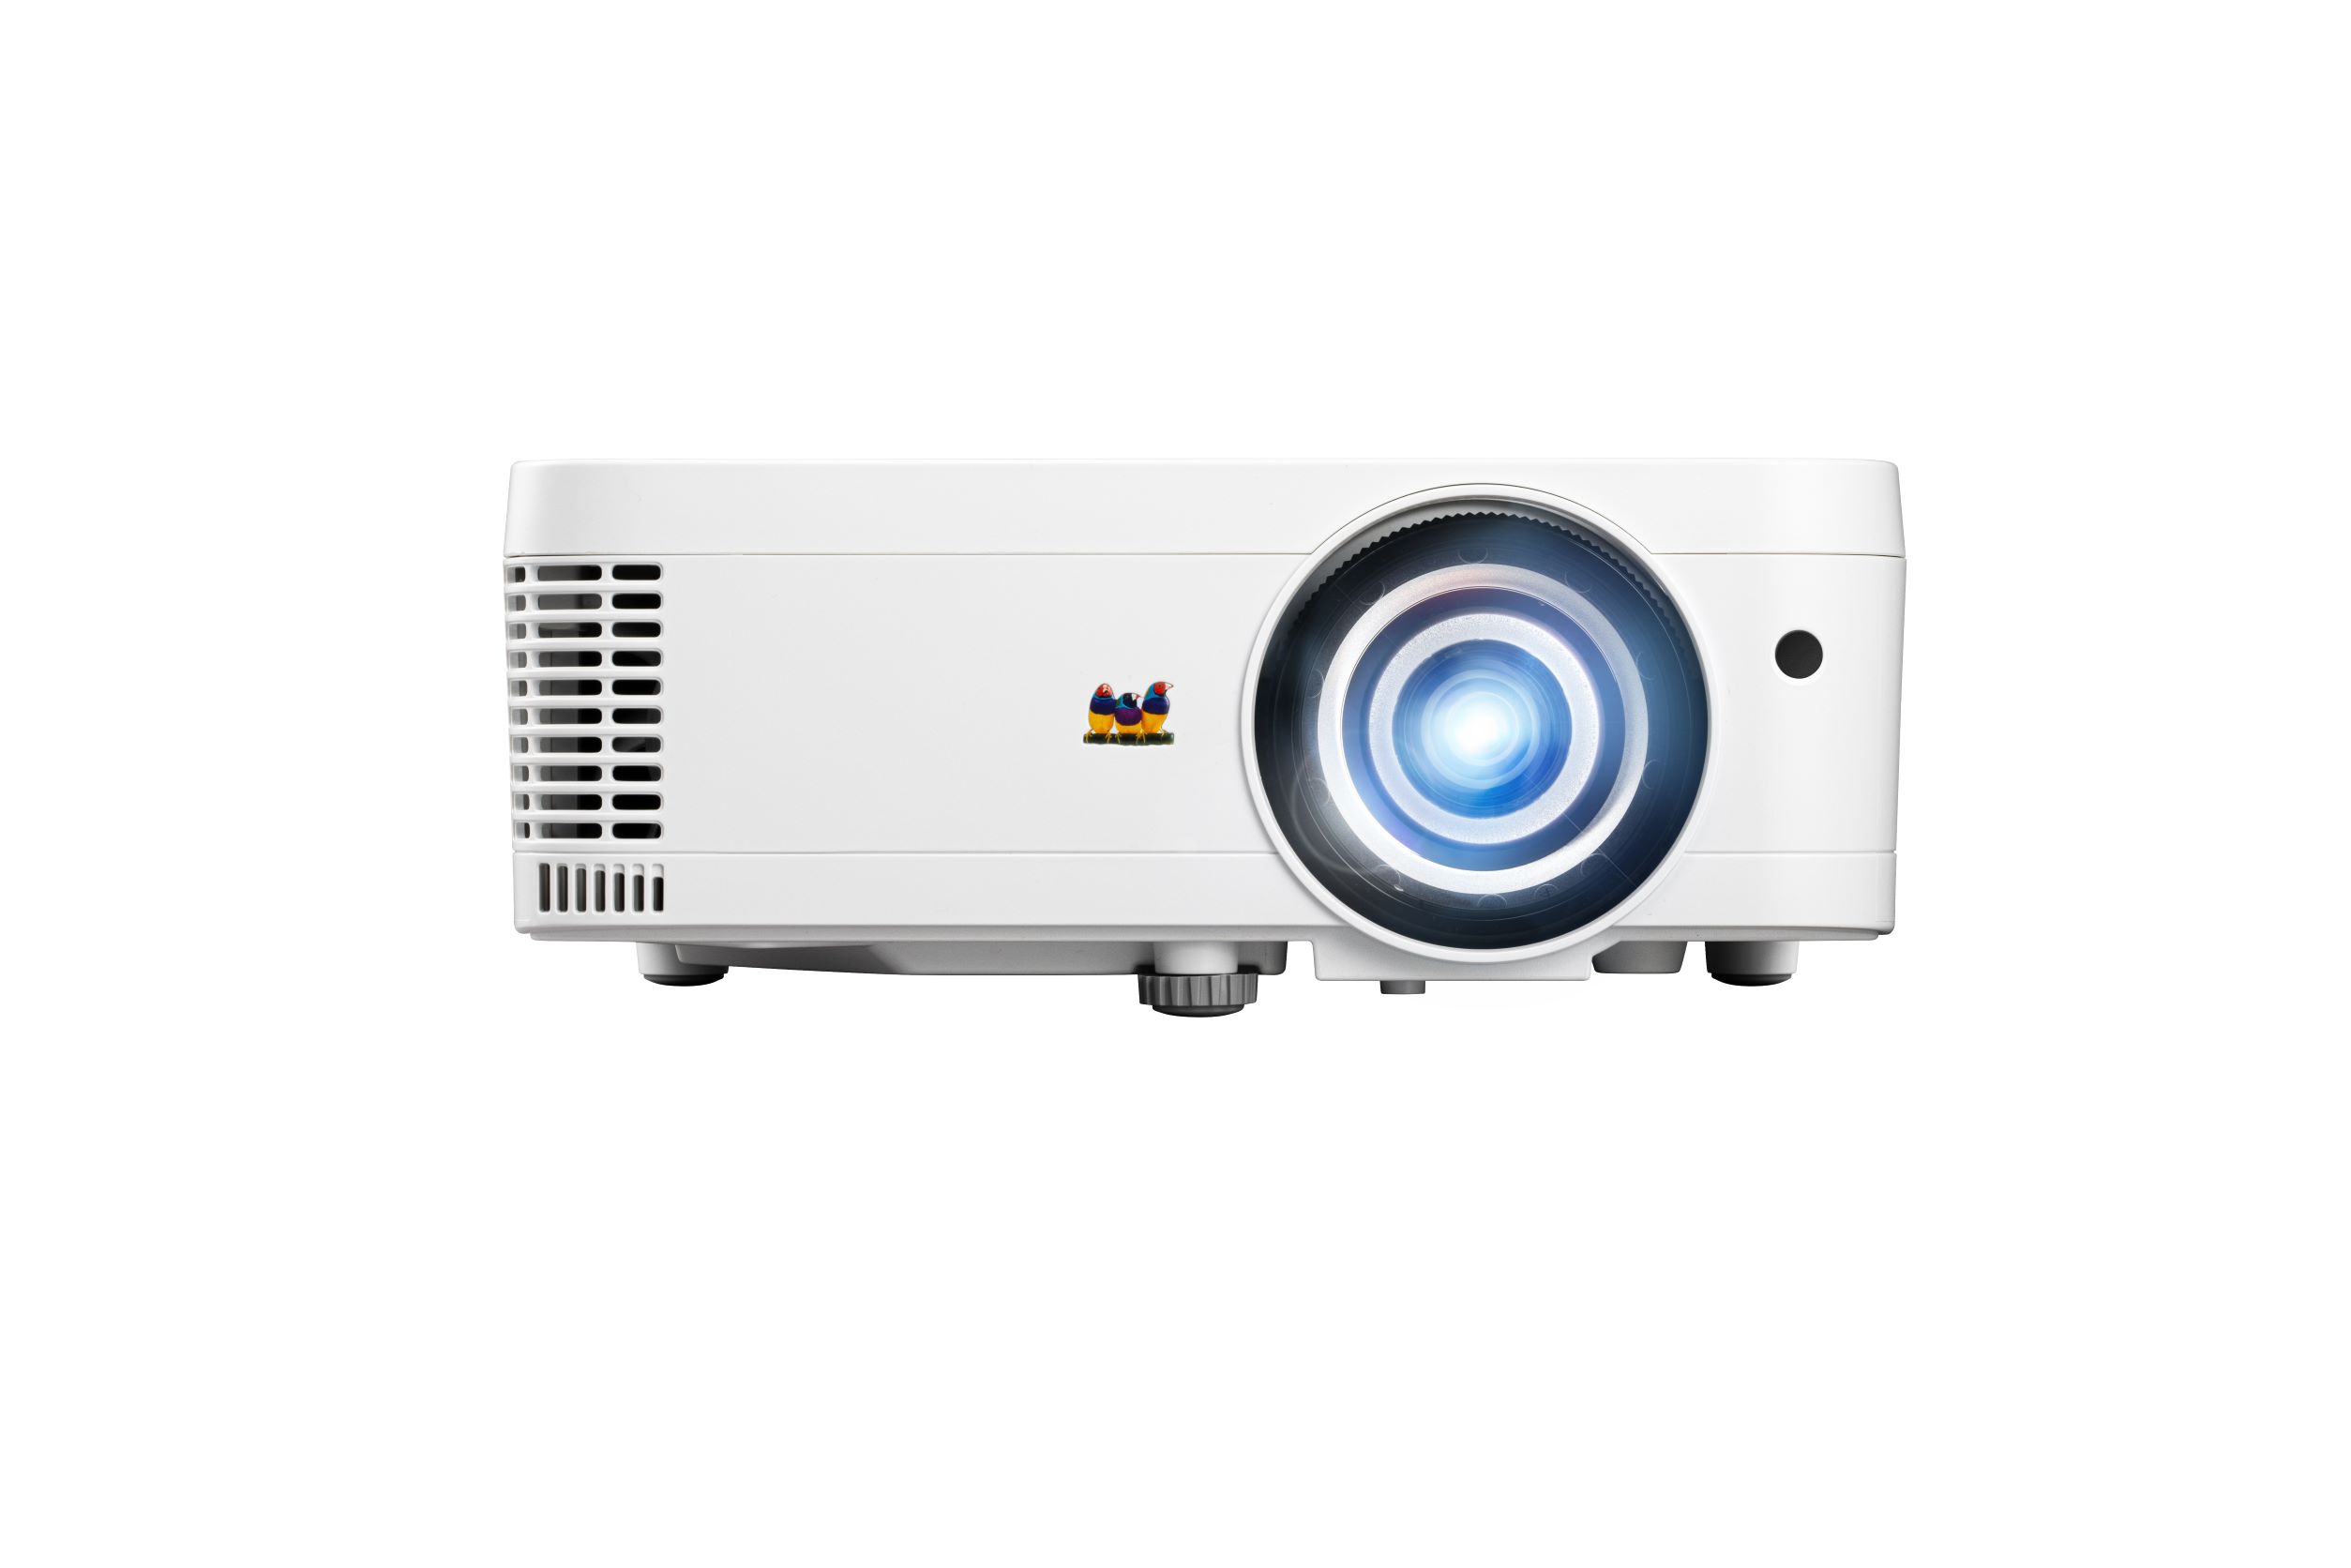 The LS550W/WH LED Projector